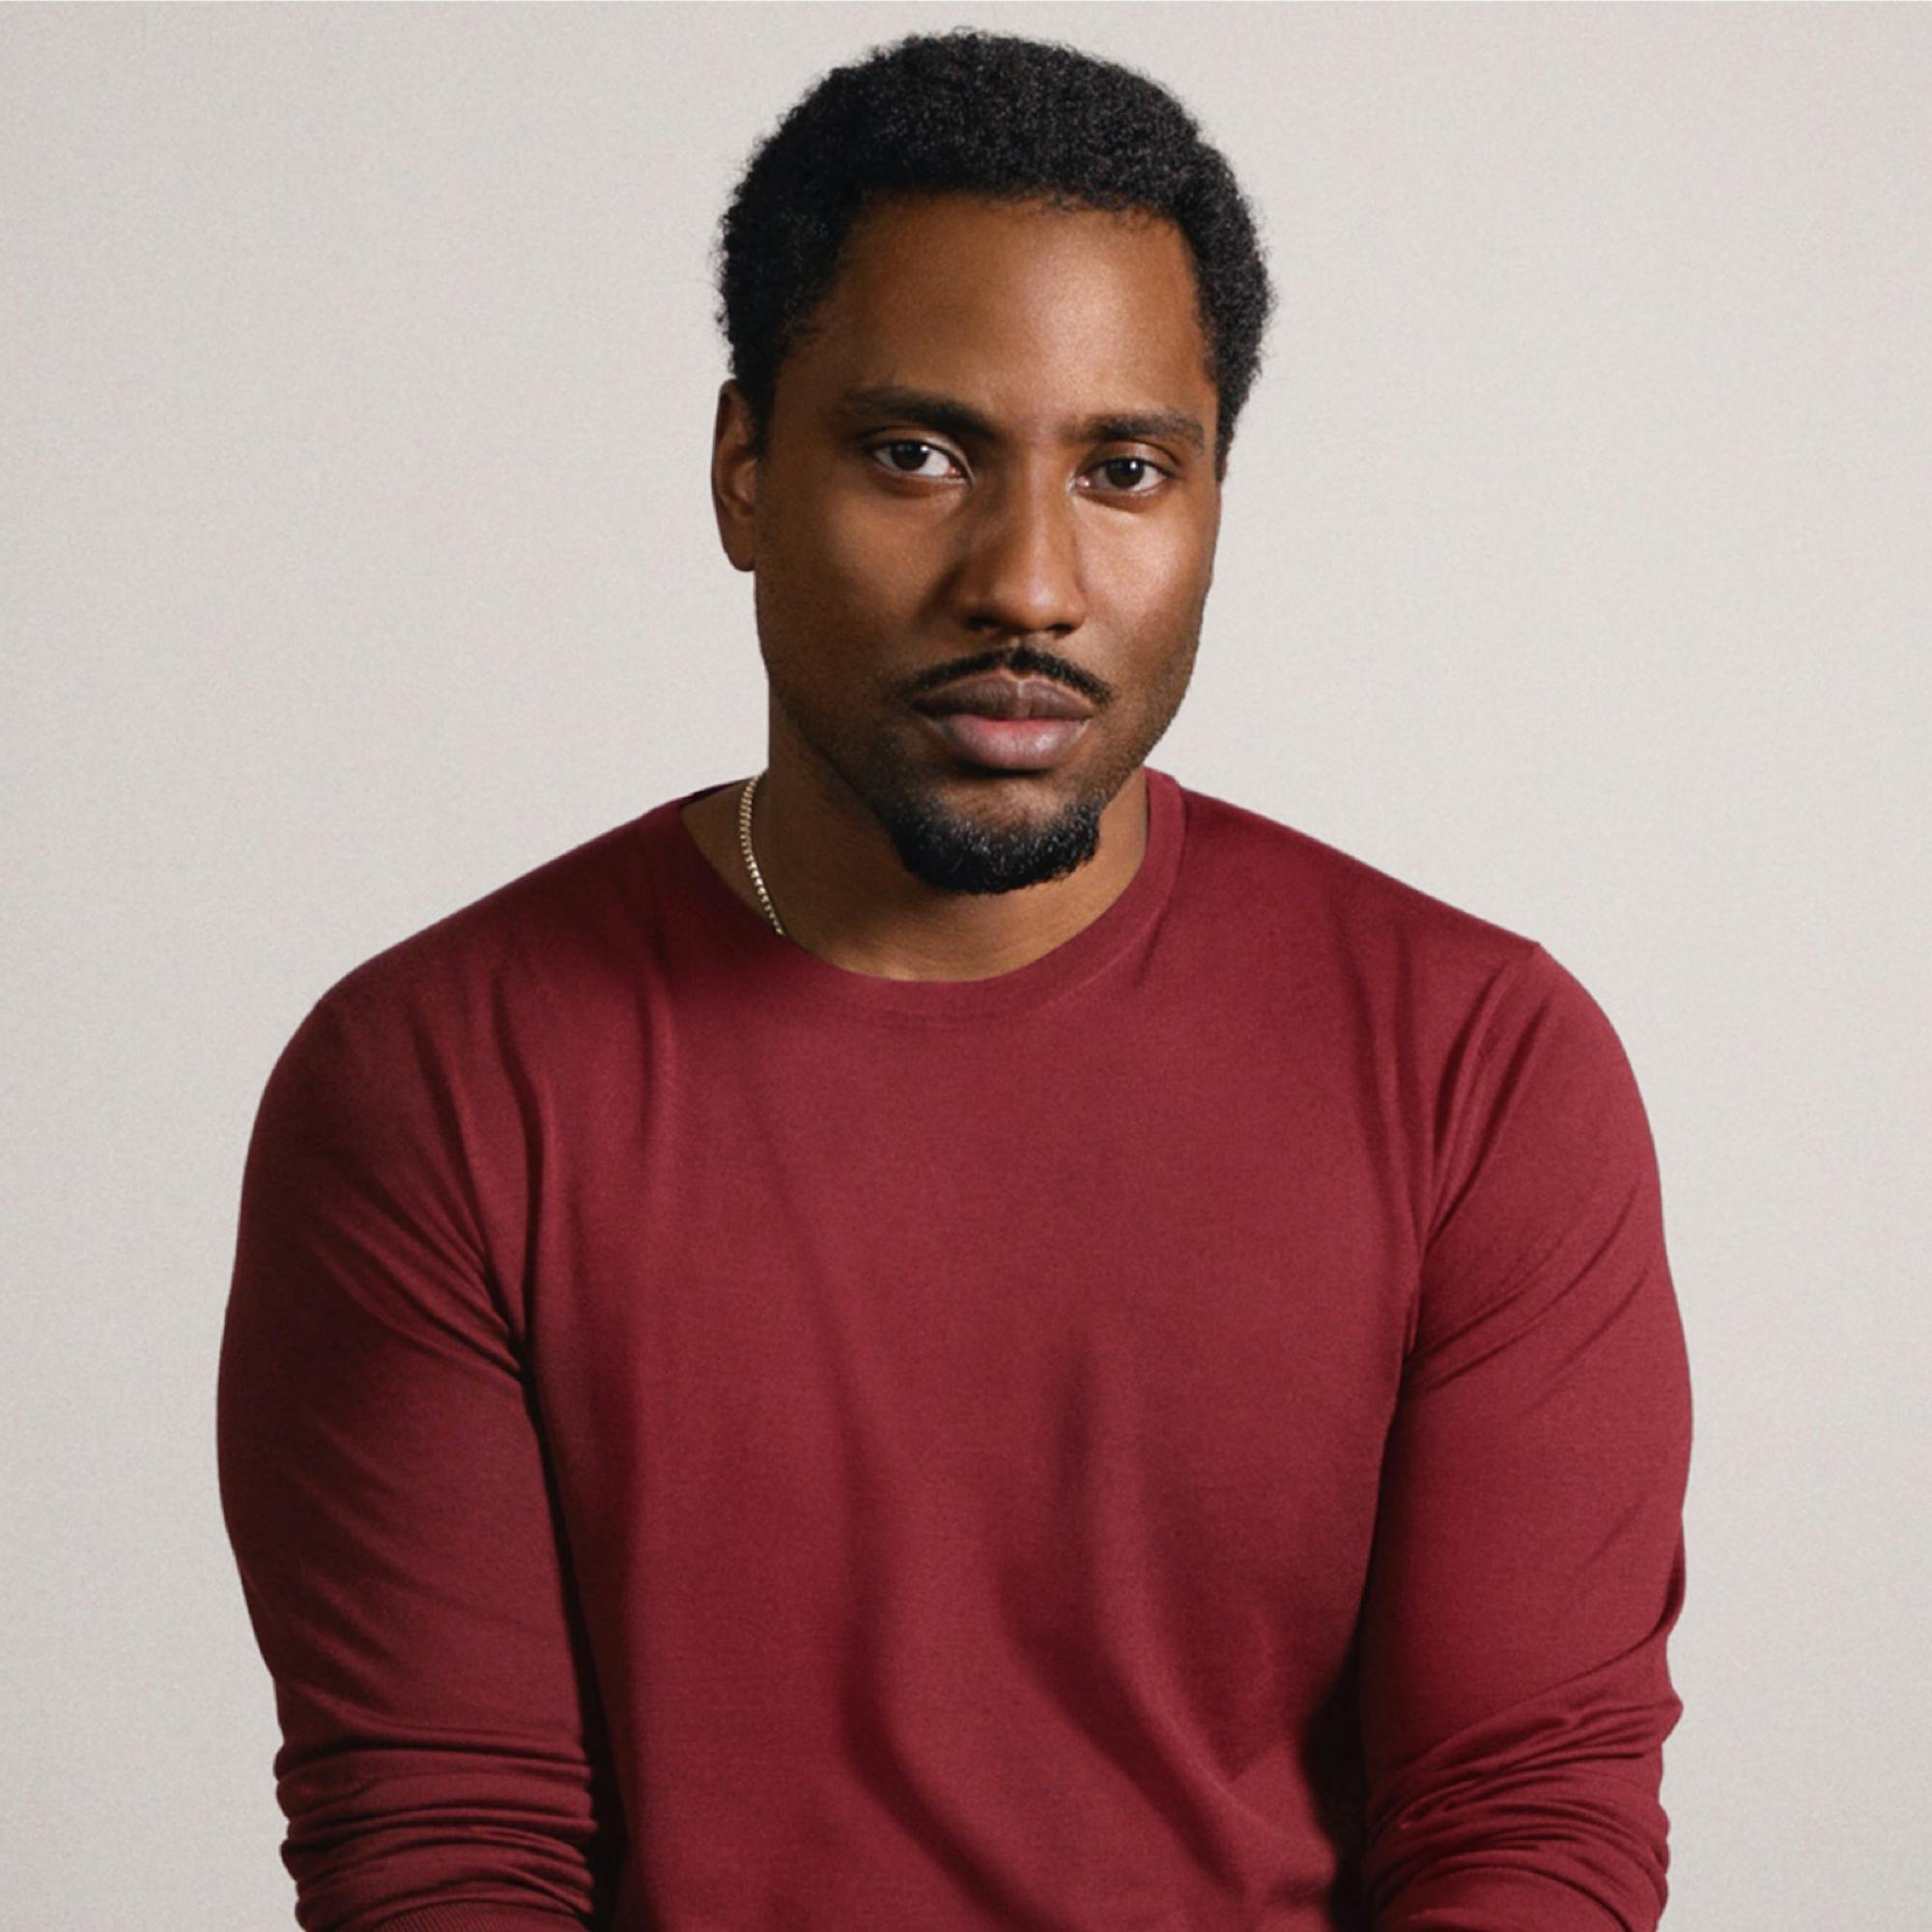 A portrait of John David Washington in a red sweater, set against a beige background. He looks directly to camera.